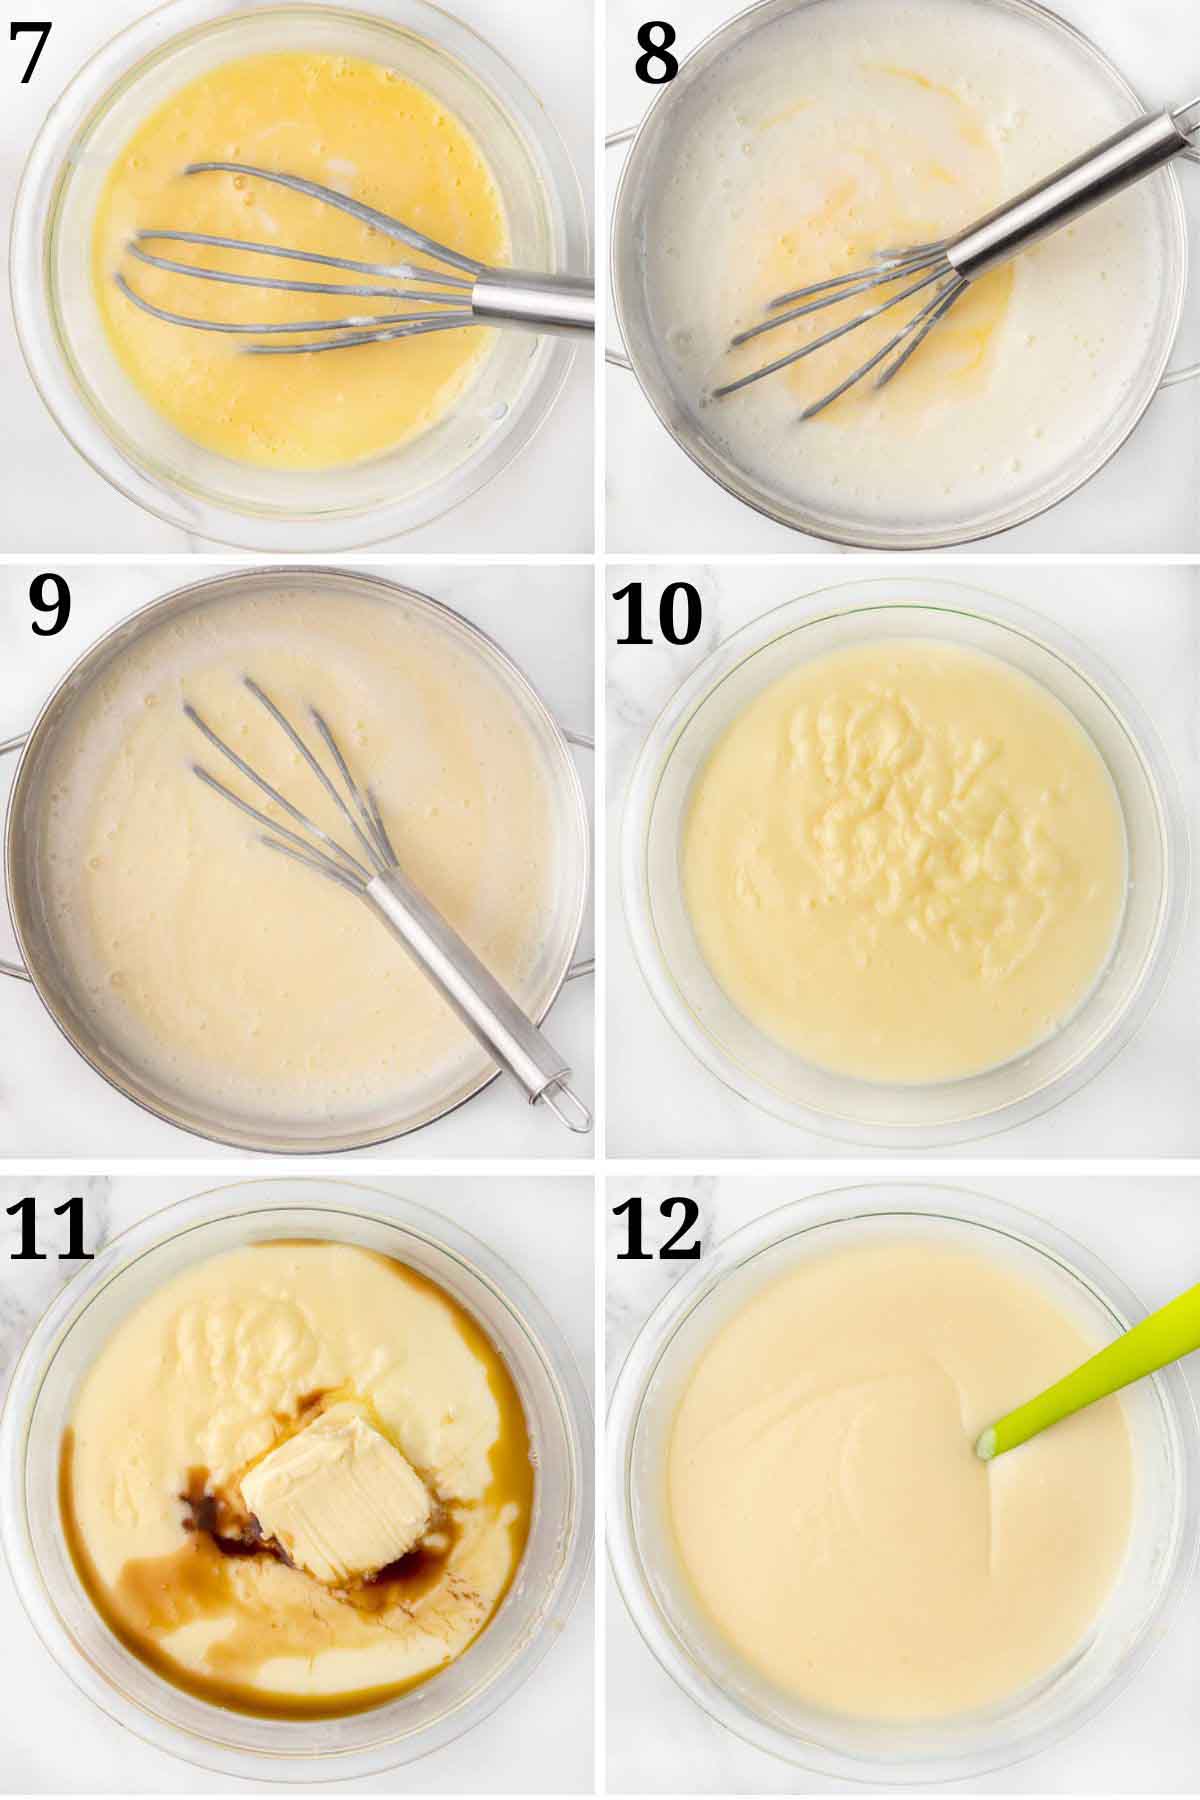 6 images showing how to finish making a banana cream pie filling.